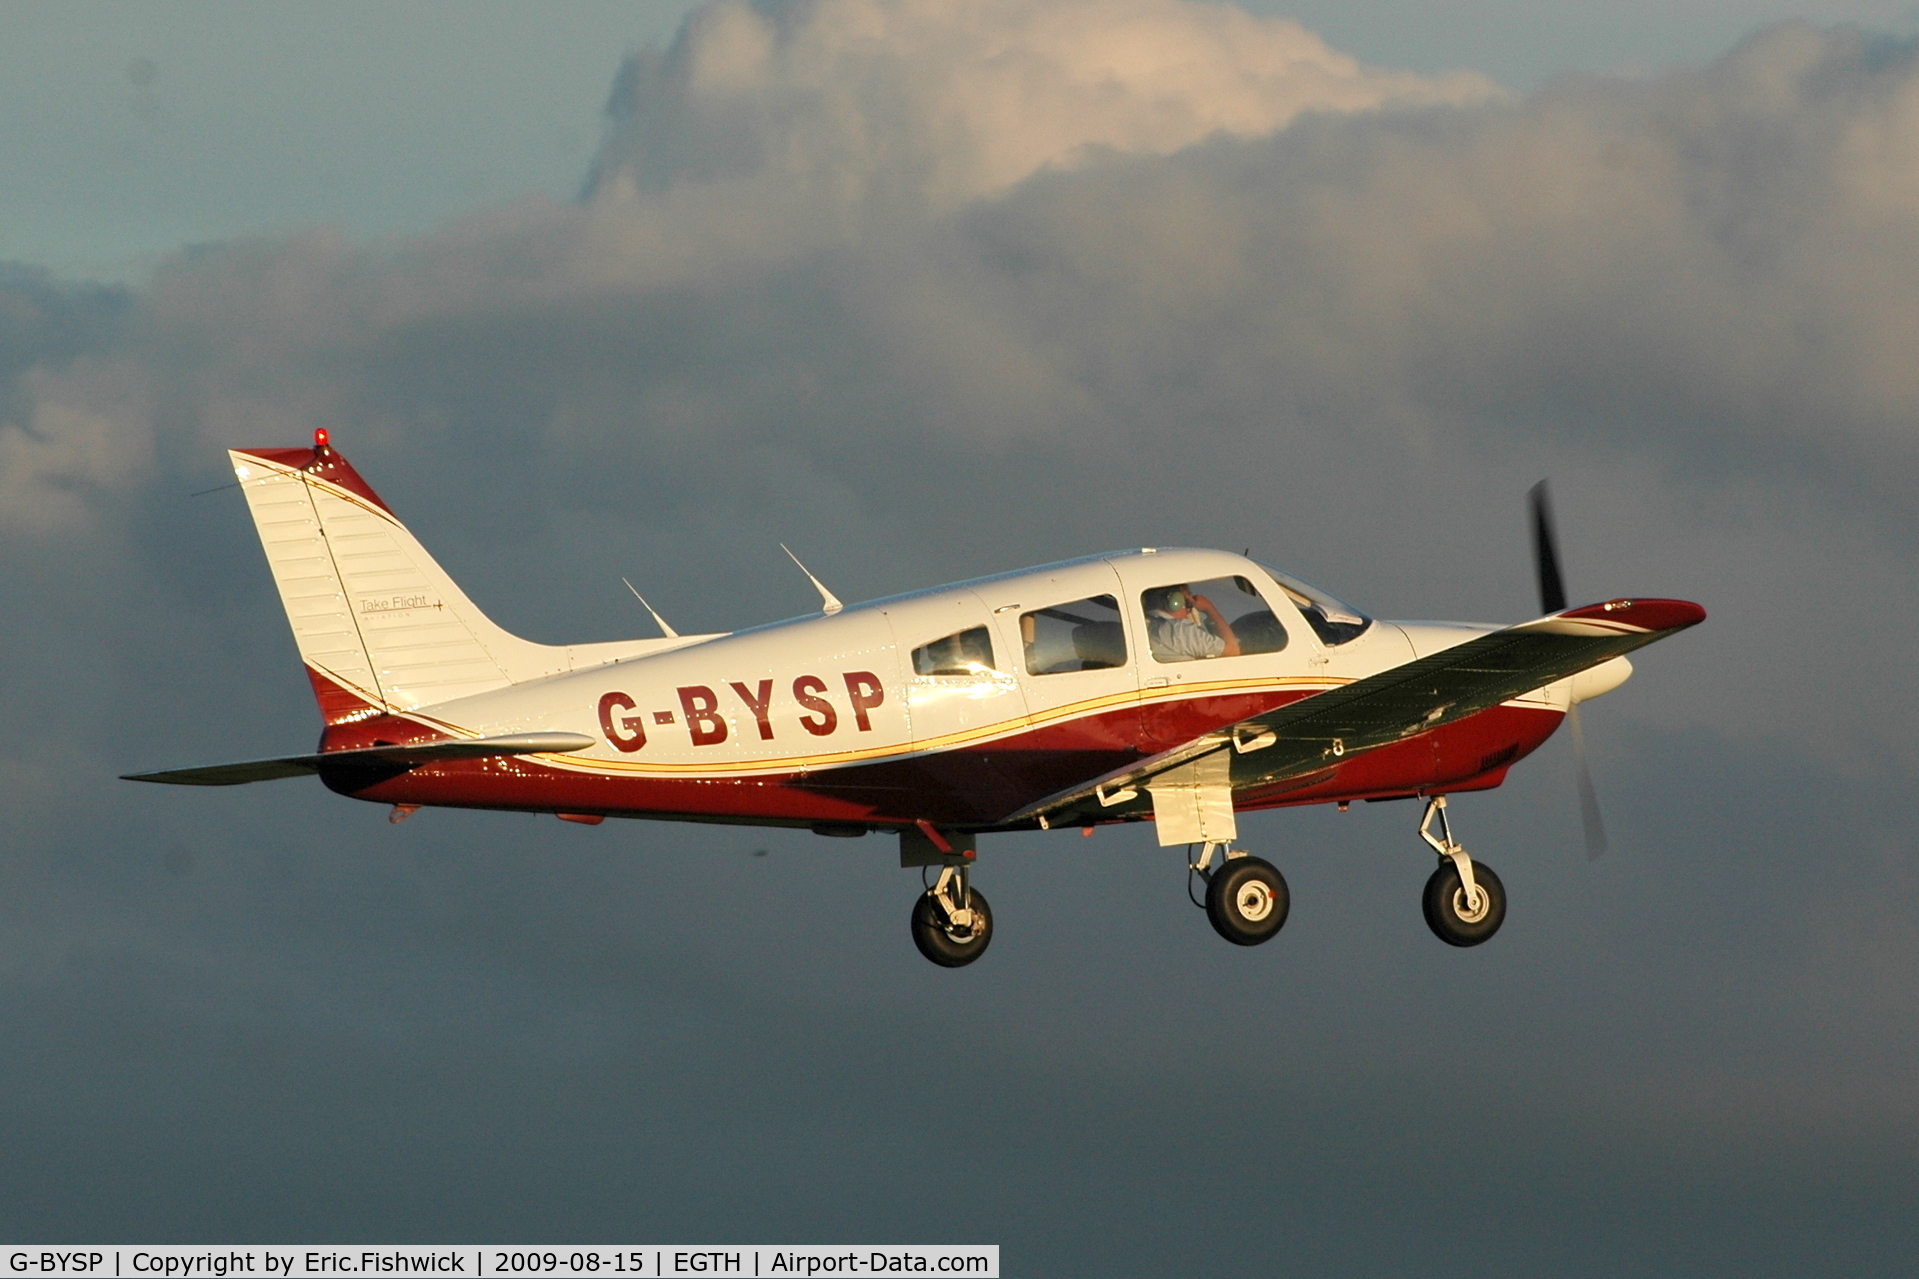 G-BYSP, 1985 Piper PA-28-181 Cherokee Archer II C/N 28-8590047, 4. G-BYSP at Shuttleworth Collection Evening Air Display Aug 09